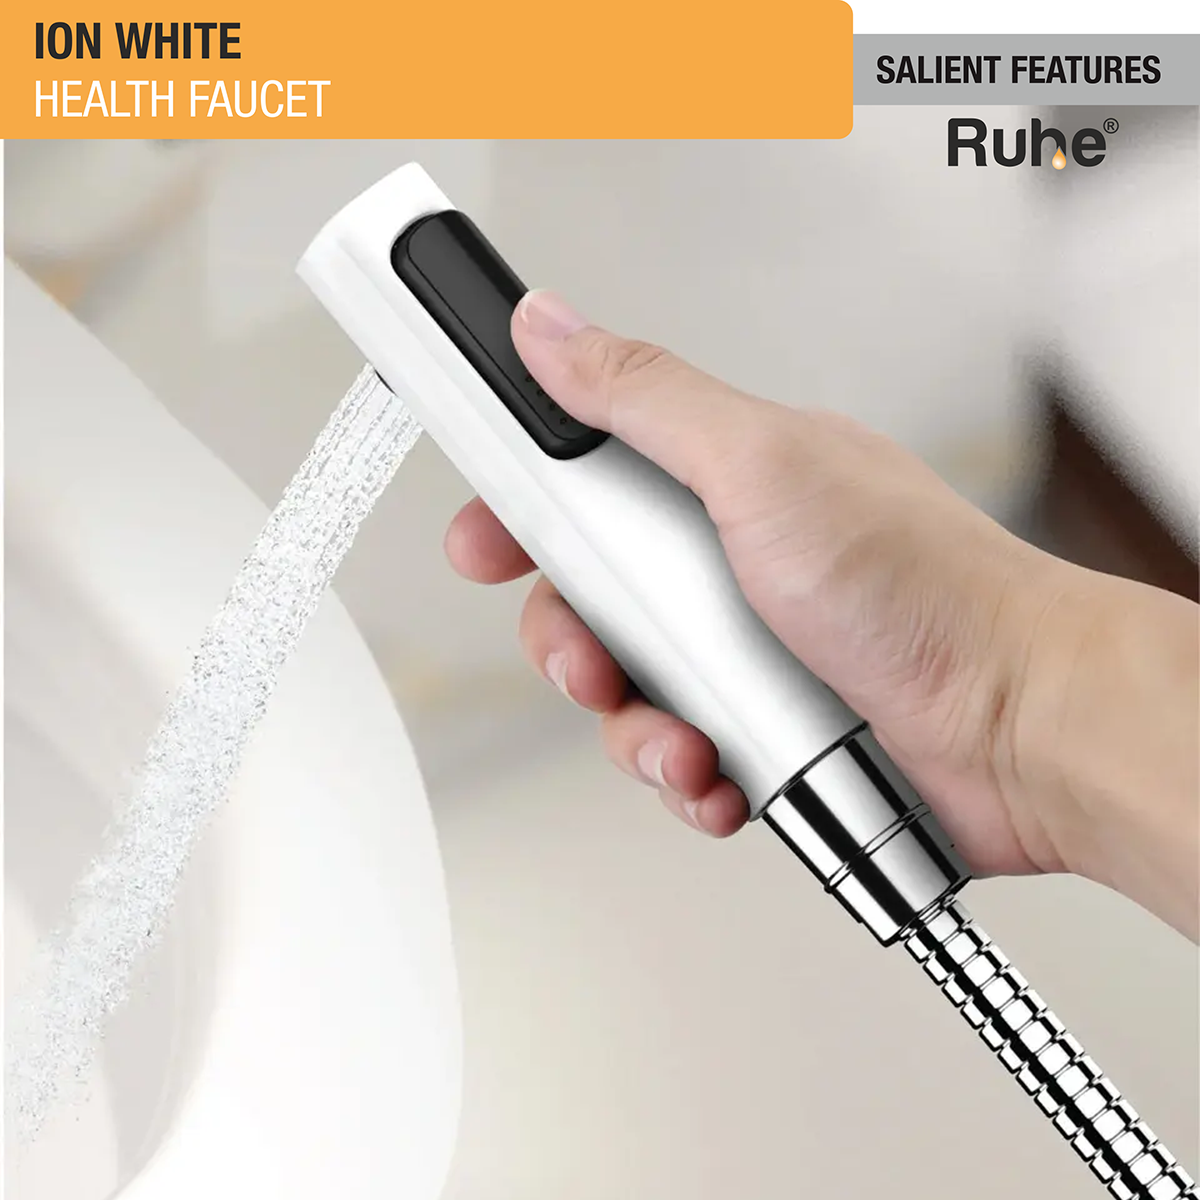 Ion White Health Faucet with Braided 1 Meter Flexible Hose (304 Grade) & Hook installed